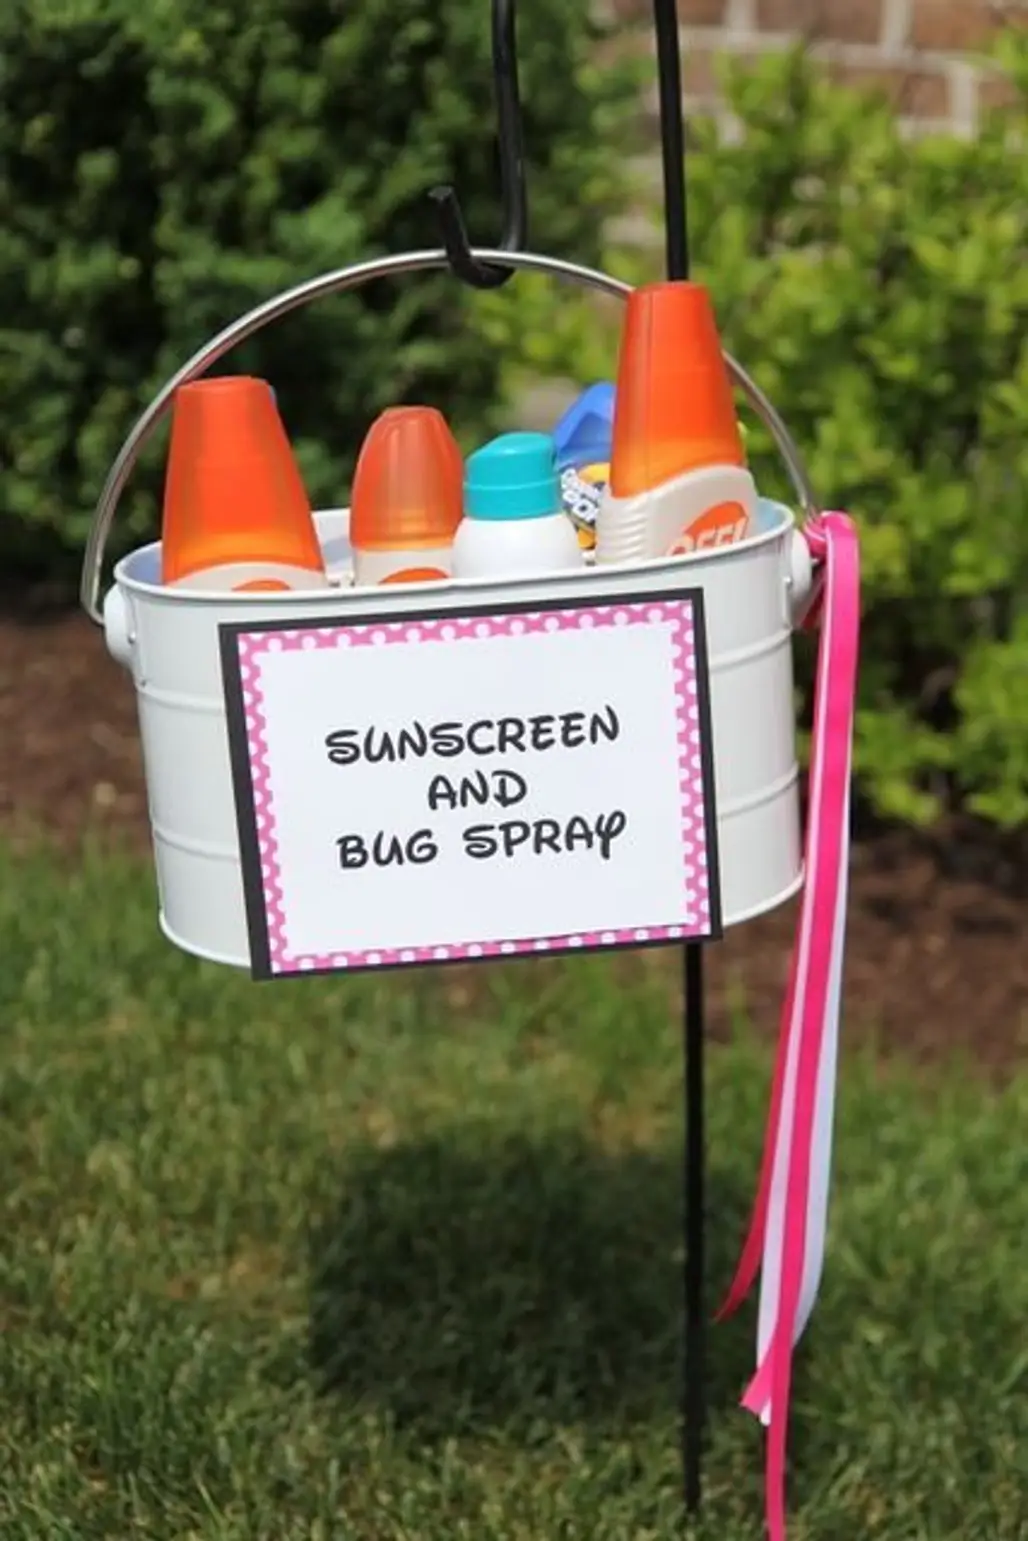 Sunscreen and Bug Spray to Keep Your Guests Happy and Safe!